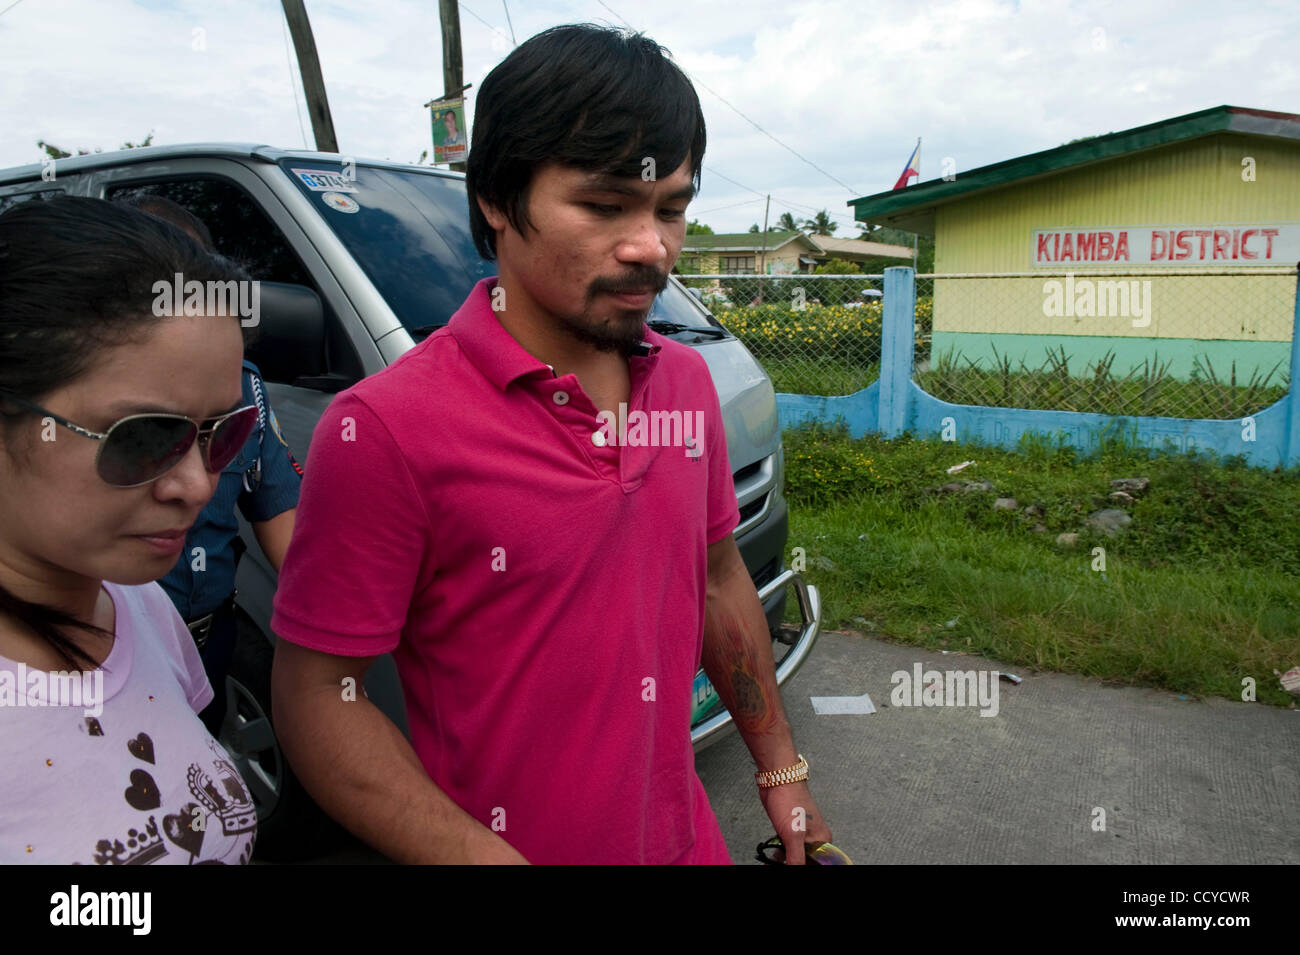 May 09, 2010 - Kiamba, Sarangani, Philippines - Boxing champion Manny Pacquiao accompanied by his wife Jinkee Jamora exit polling station during the Philippine national and local elections on 10 May 2010 in Kiamba, Sarangani Philippines..Manny Pacquiao is running for the congressman..For the first t Stock Photo